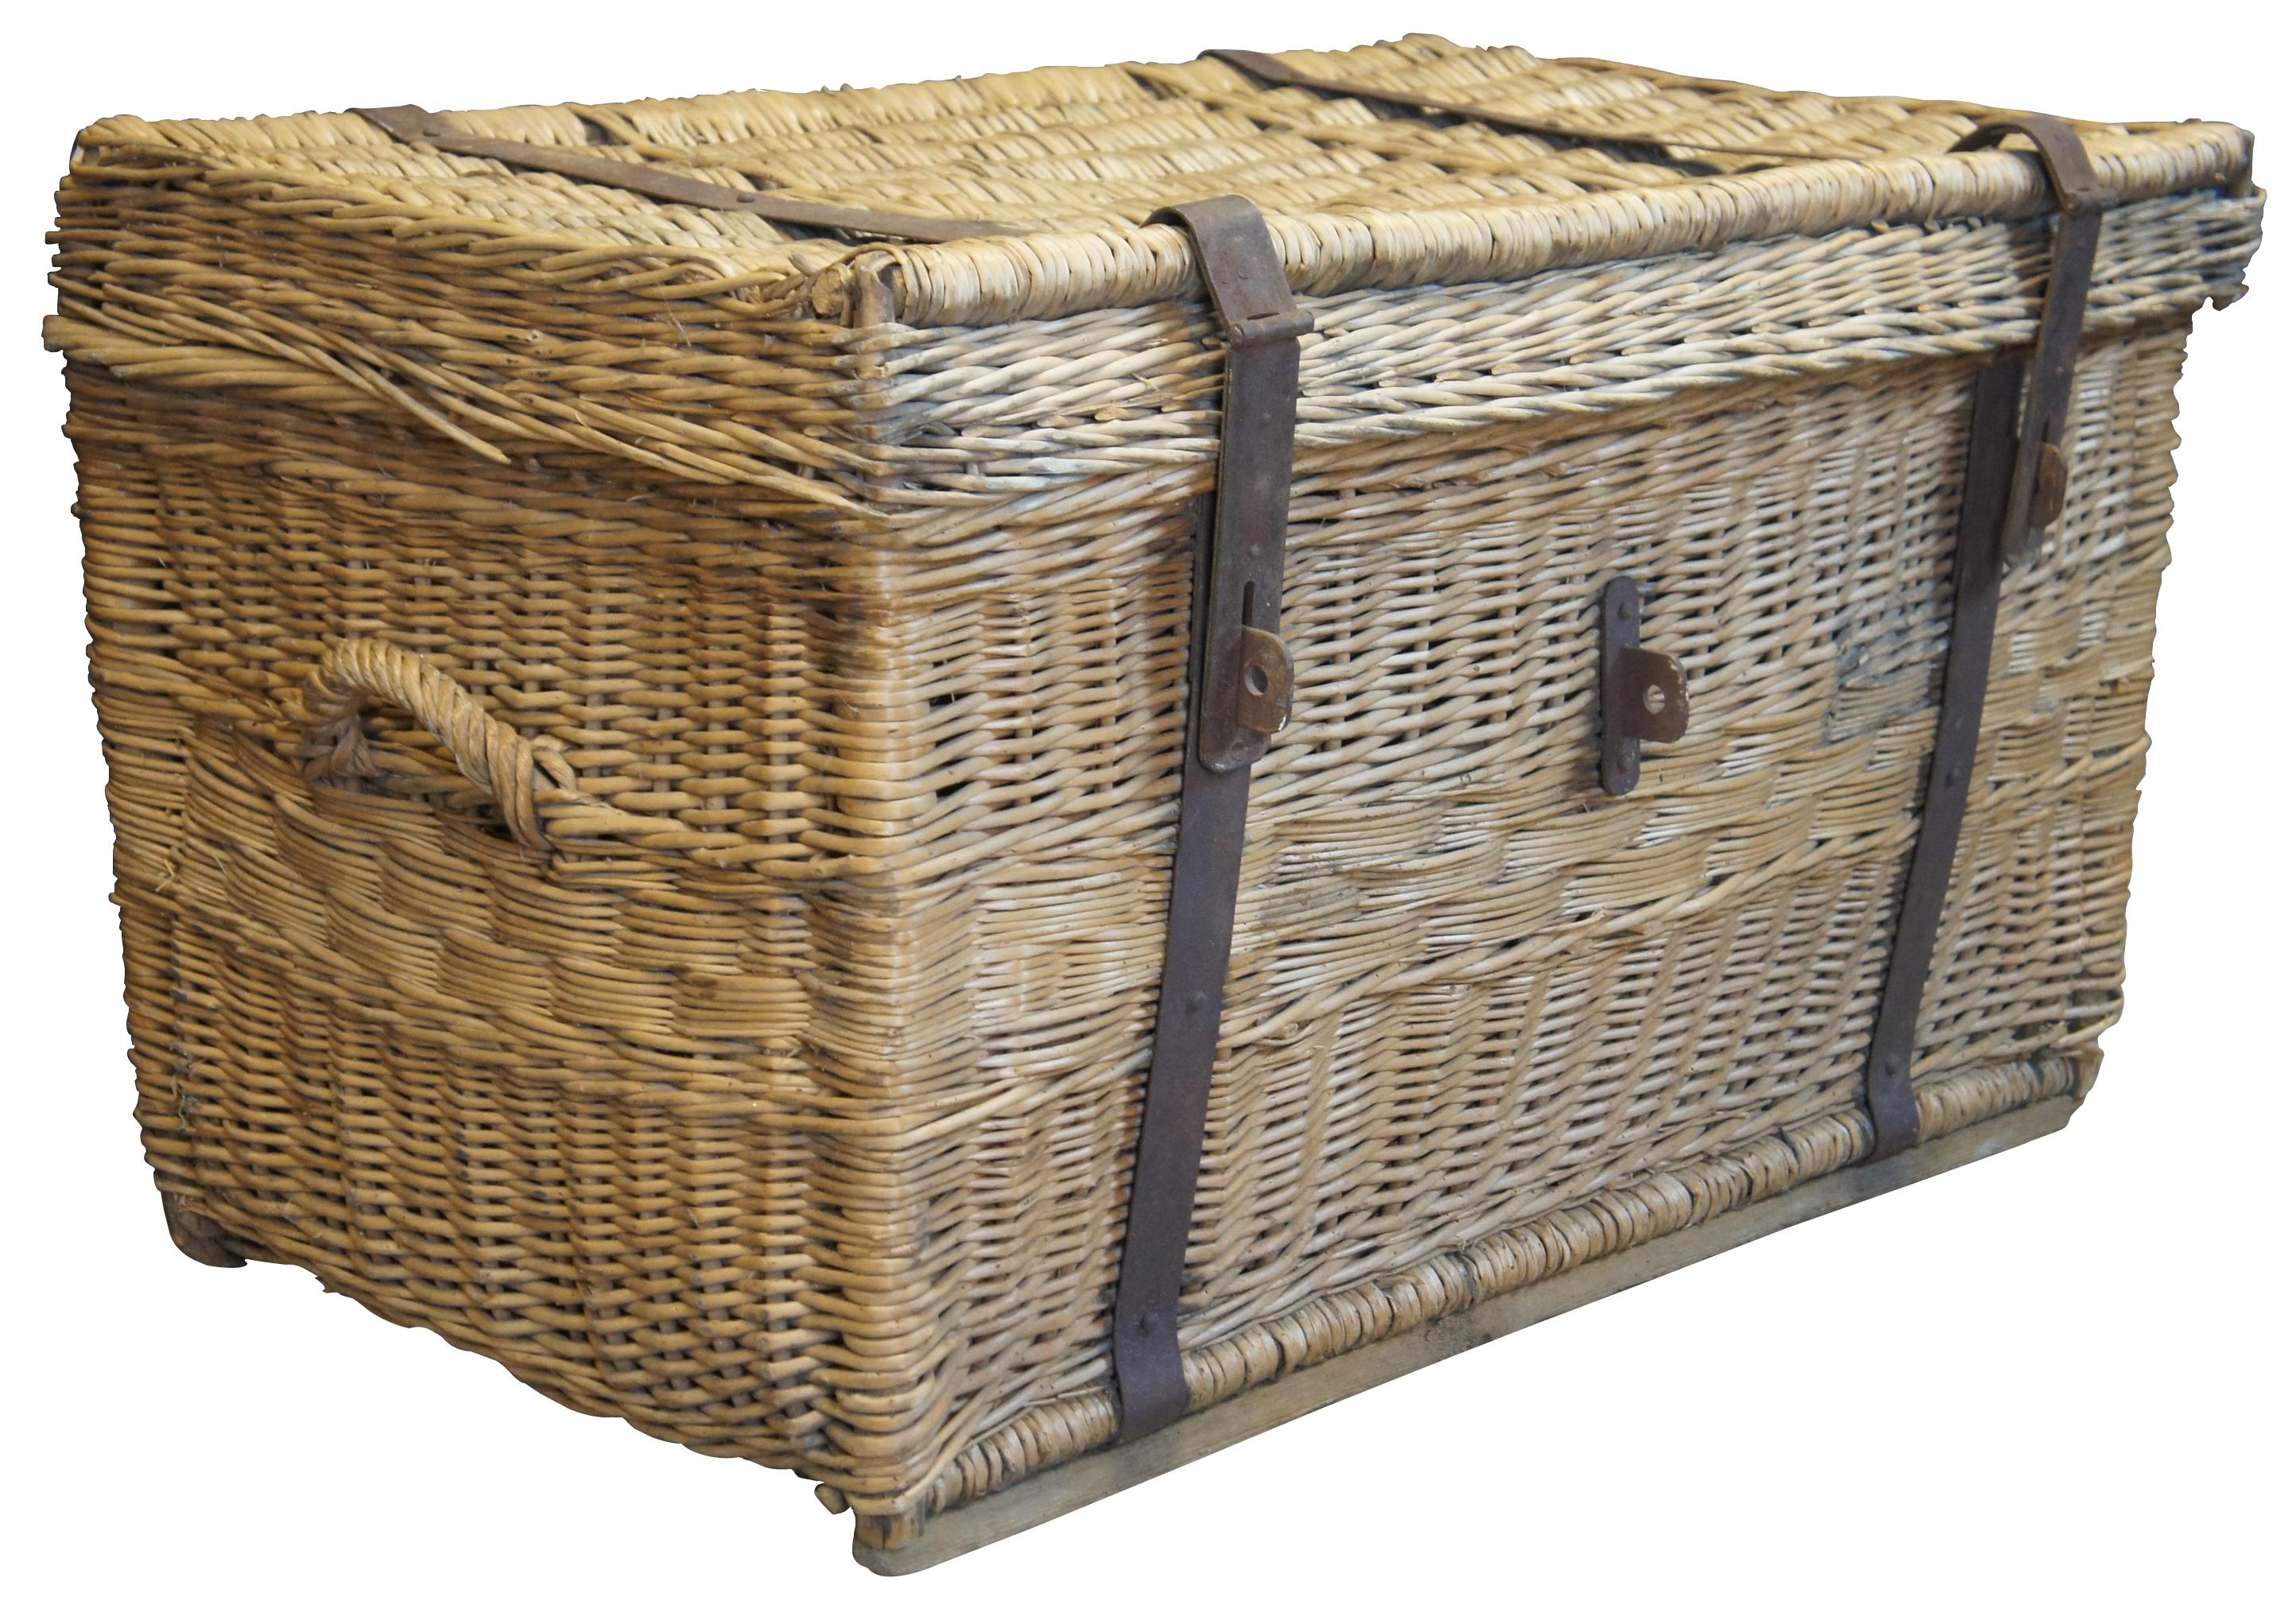 Early 20th century European wicker trunk. A nice oversized carrier with iron locking system. Features handles on each side. Great for use as a hamper, table or accent piece.
 